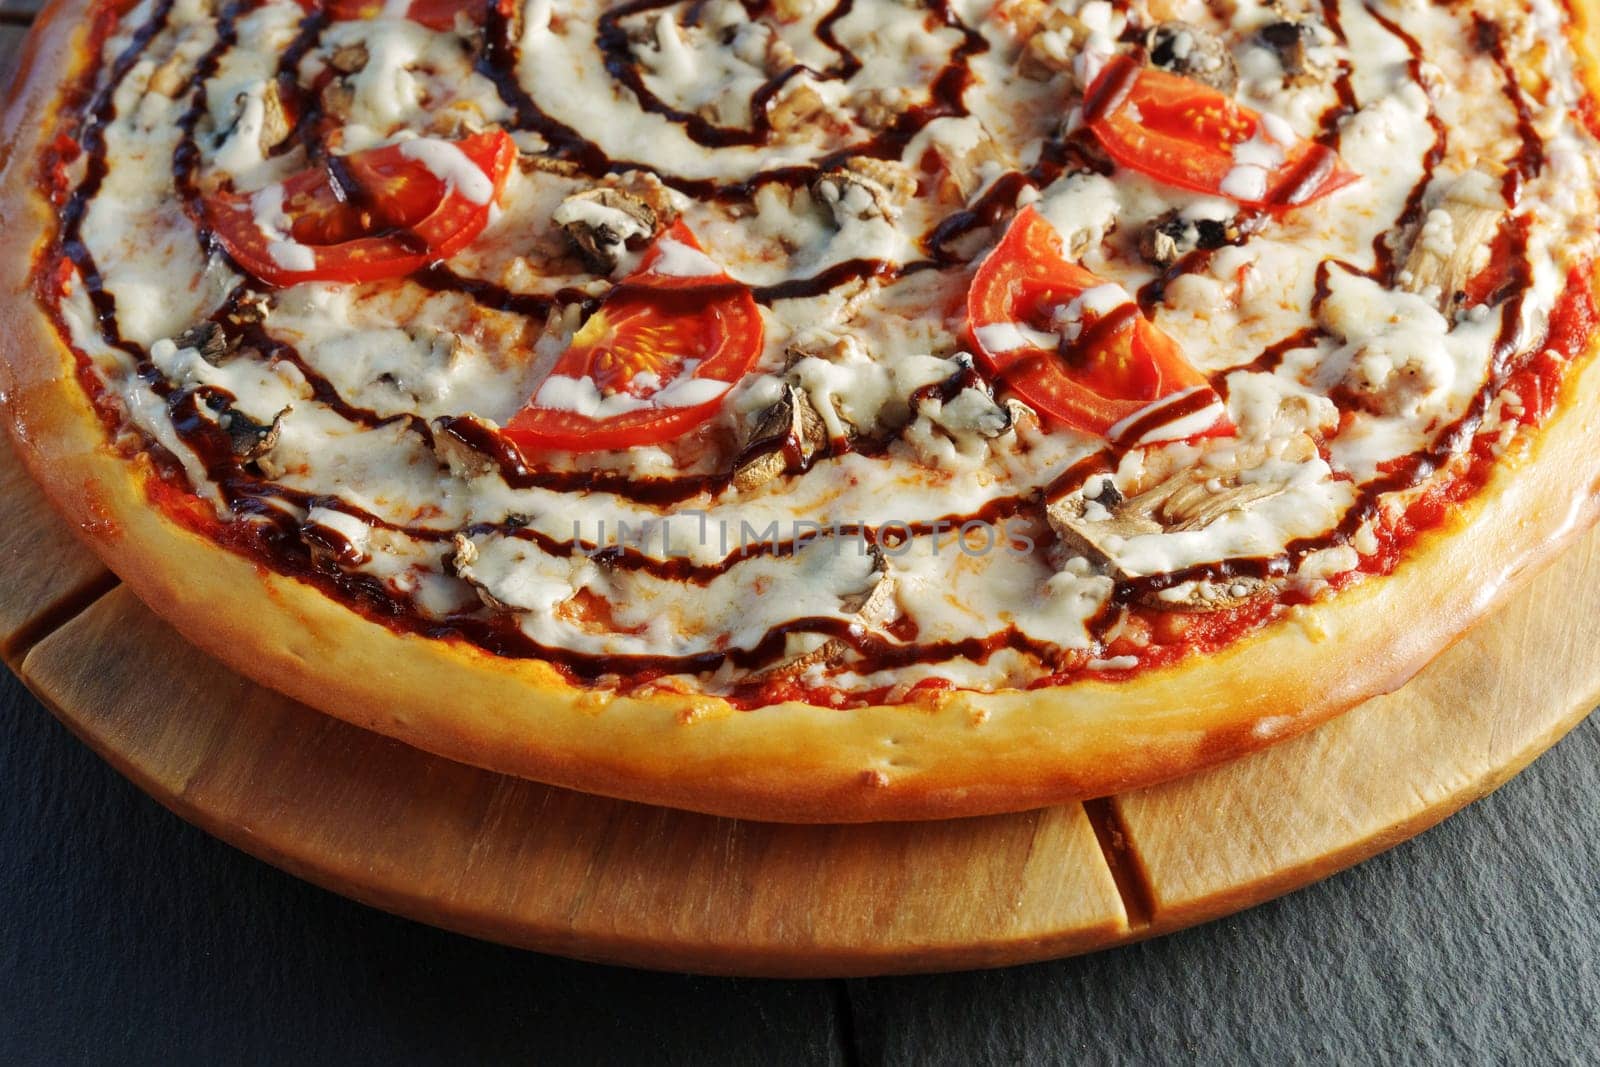 Gourmet Tomato and Mushroom Pizza Delight on Wooden Board by darksoul72